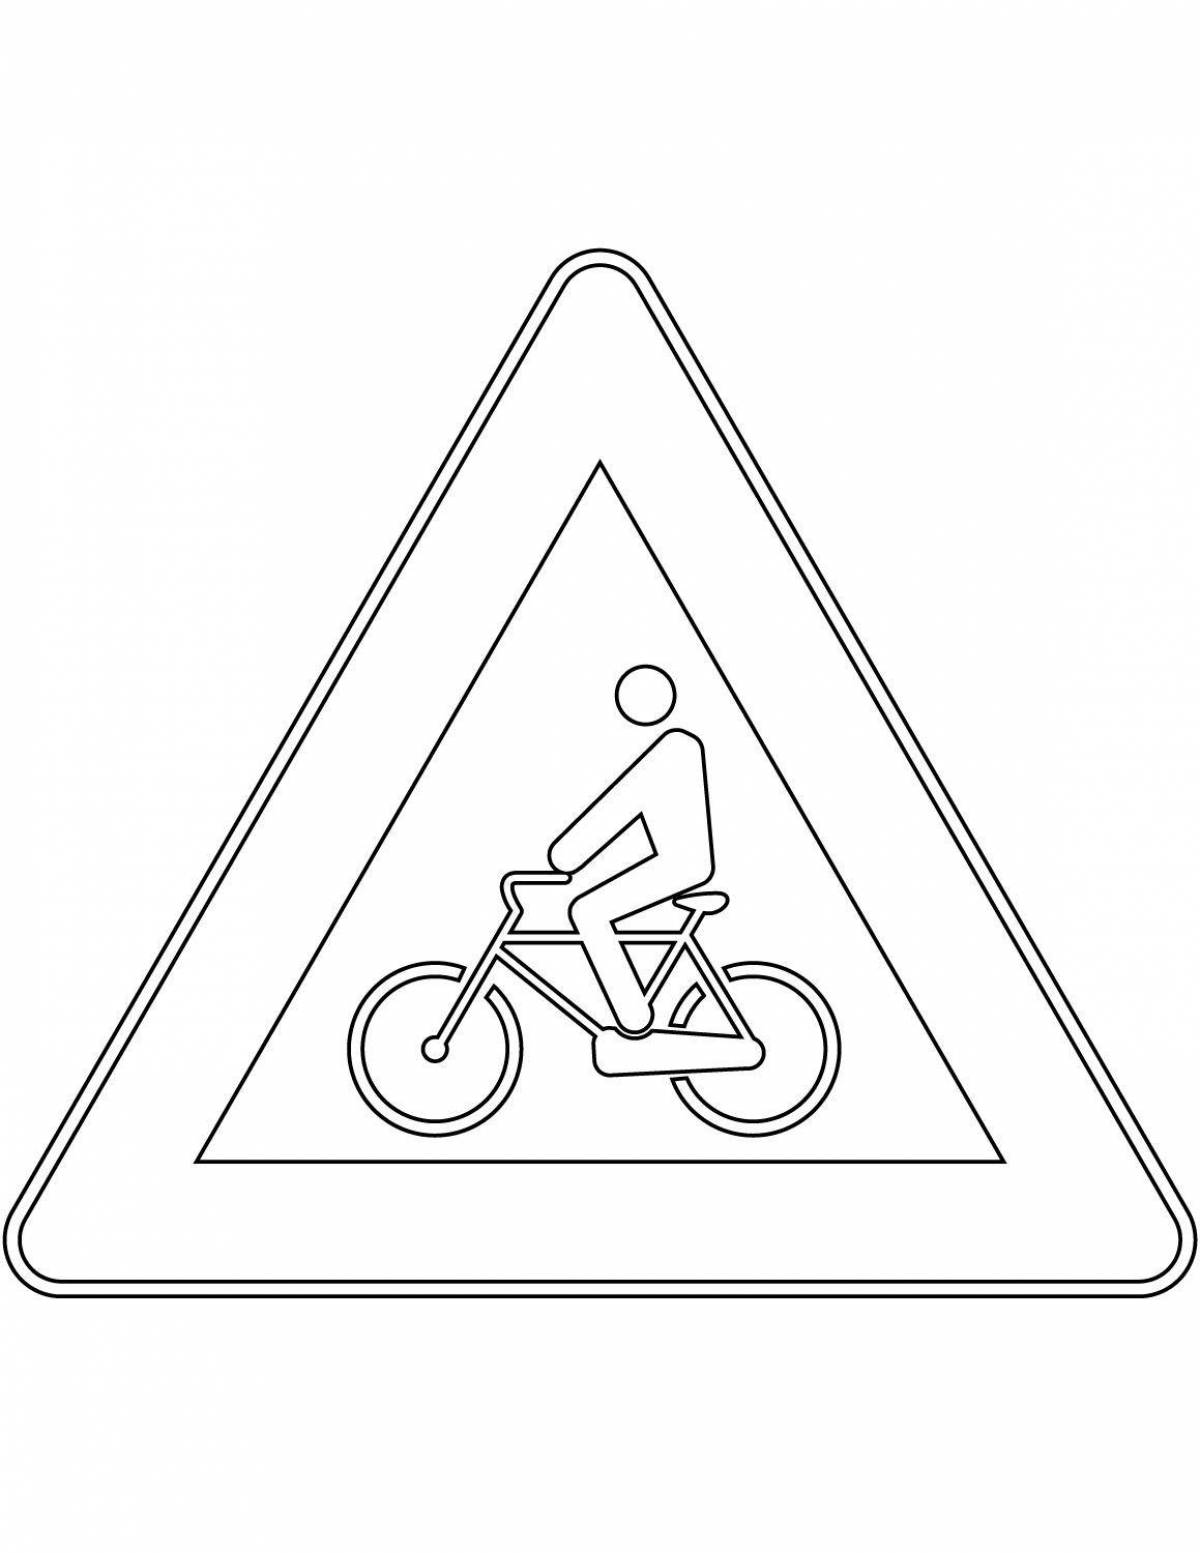 Visibly shining road sign for pedestrians